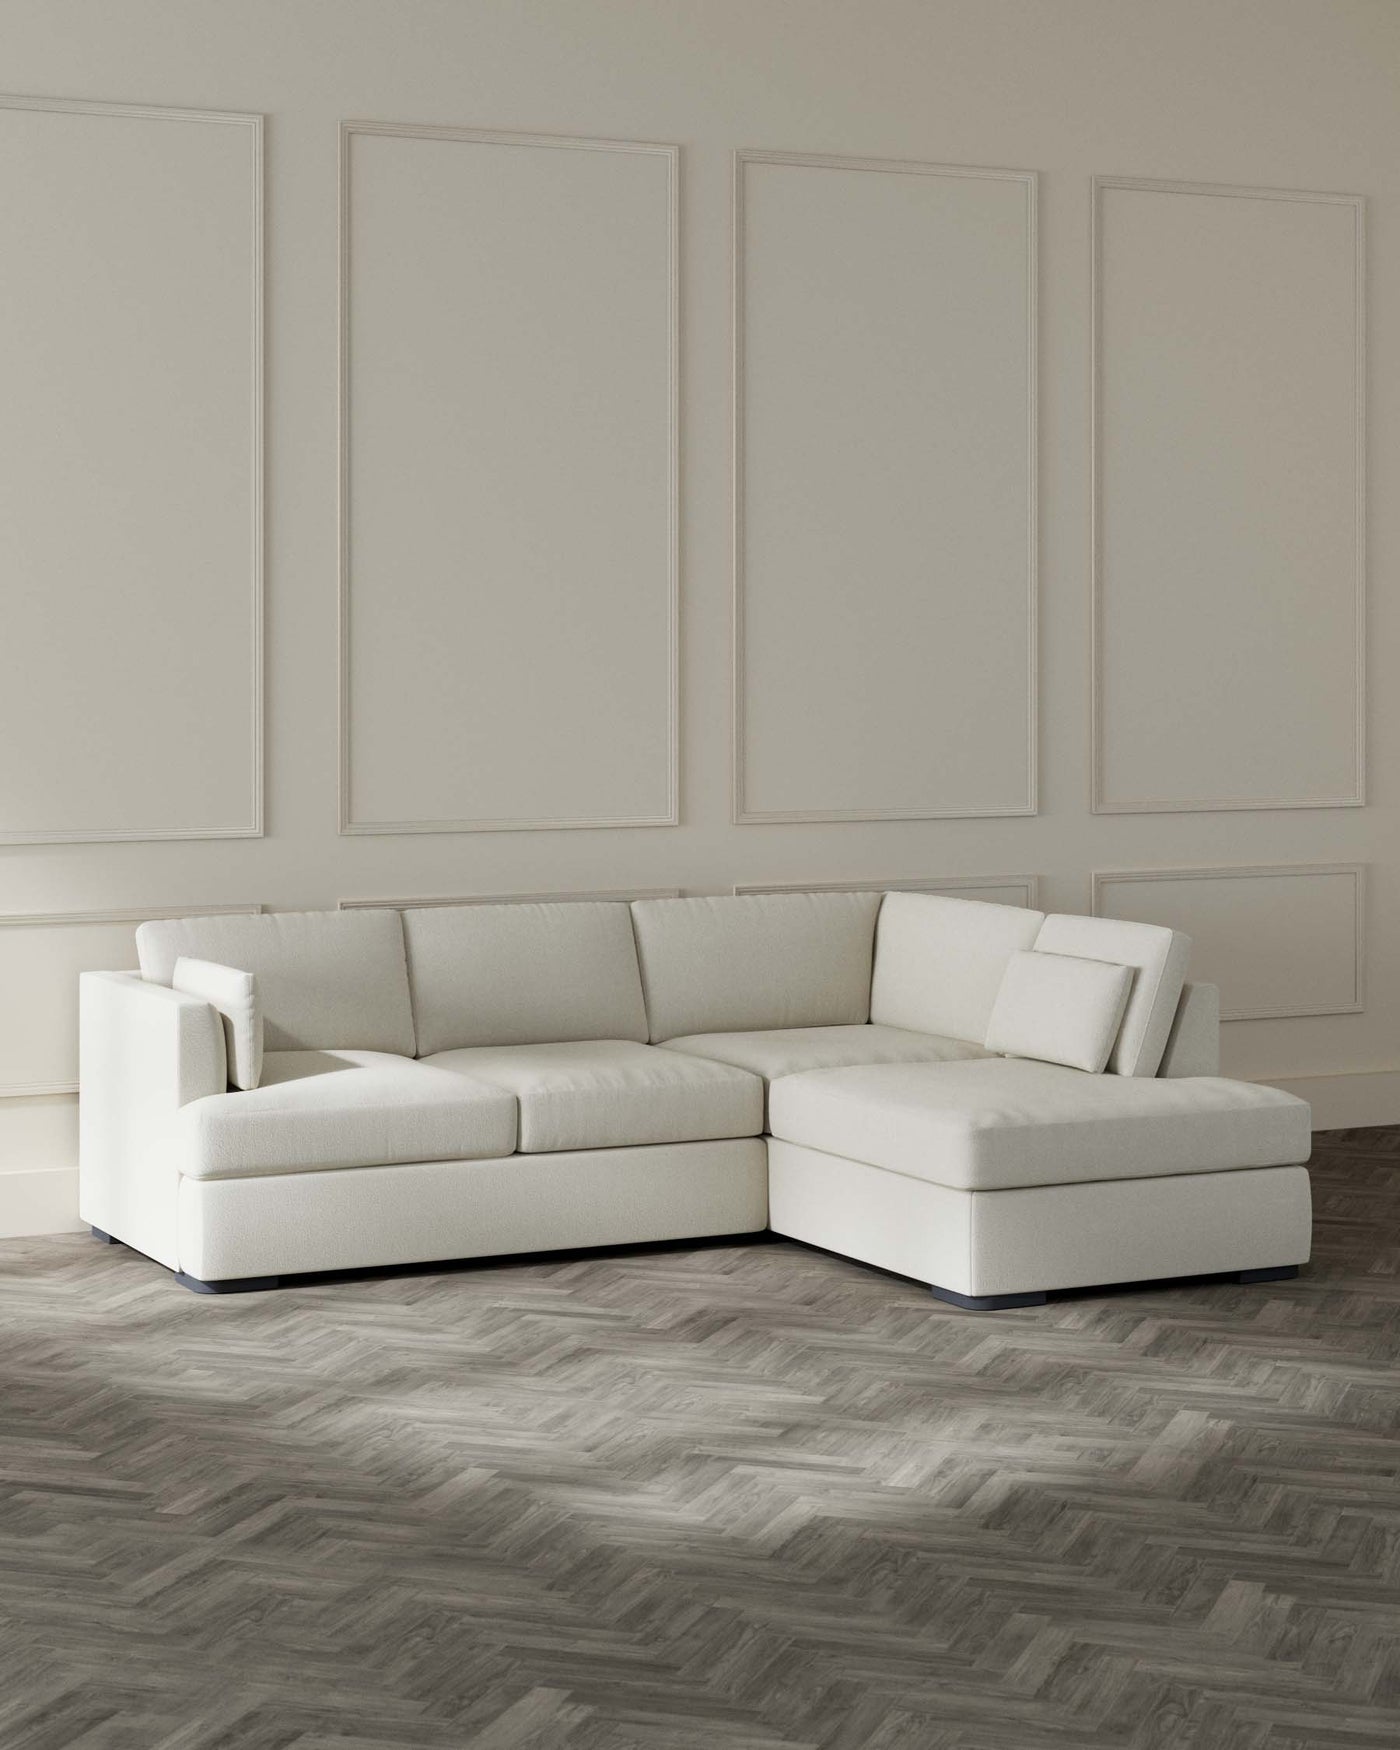 Modern light-coloured sectional sofa with chaise lounge on dark herringbone parquet floor against a wall with decorative panels.